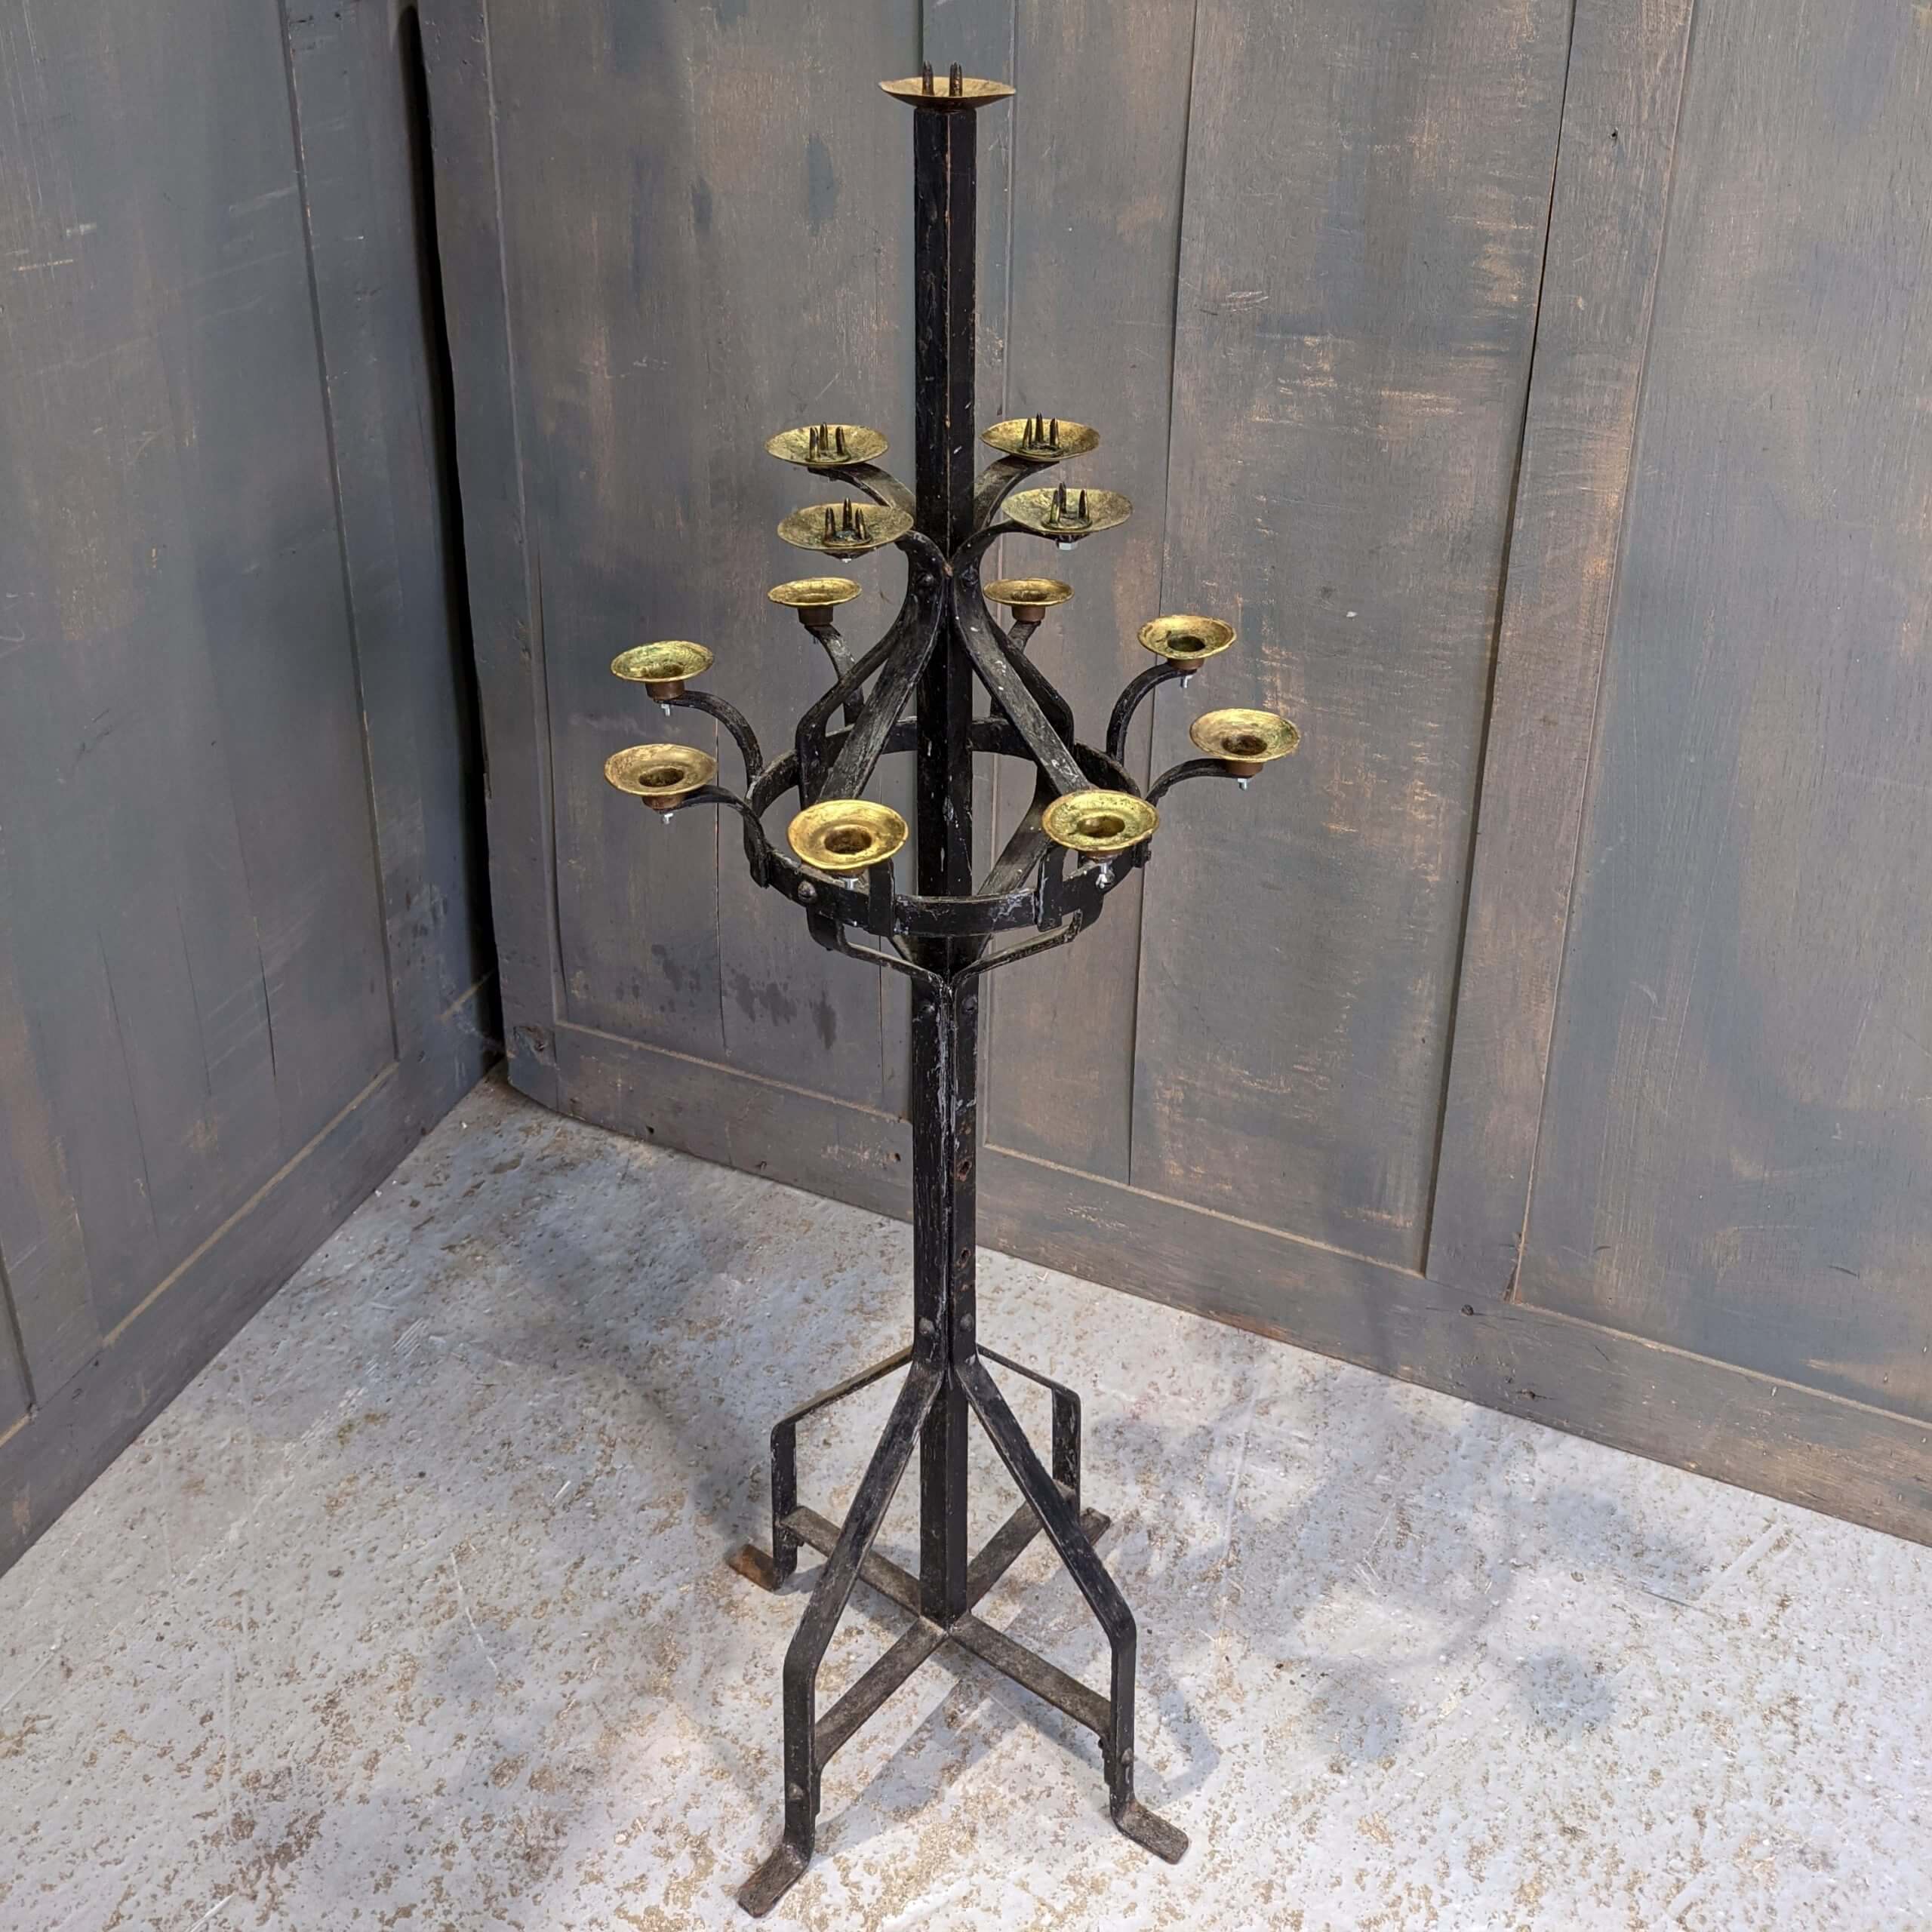 Small Antique Iron & Brass Church Votive Stand with 13 Candle Holders  (SOLD) - Antique Church Furnishings